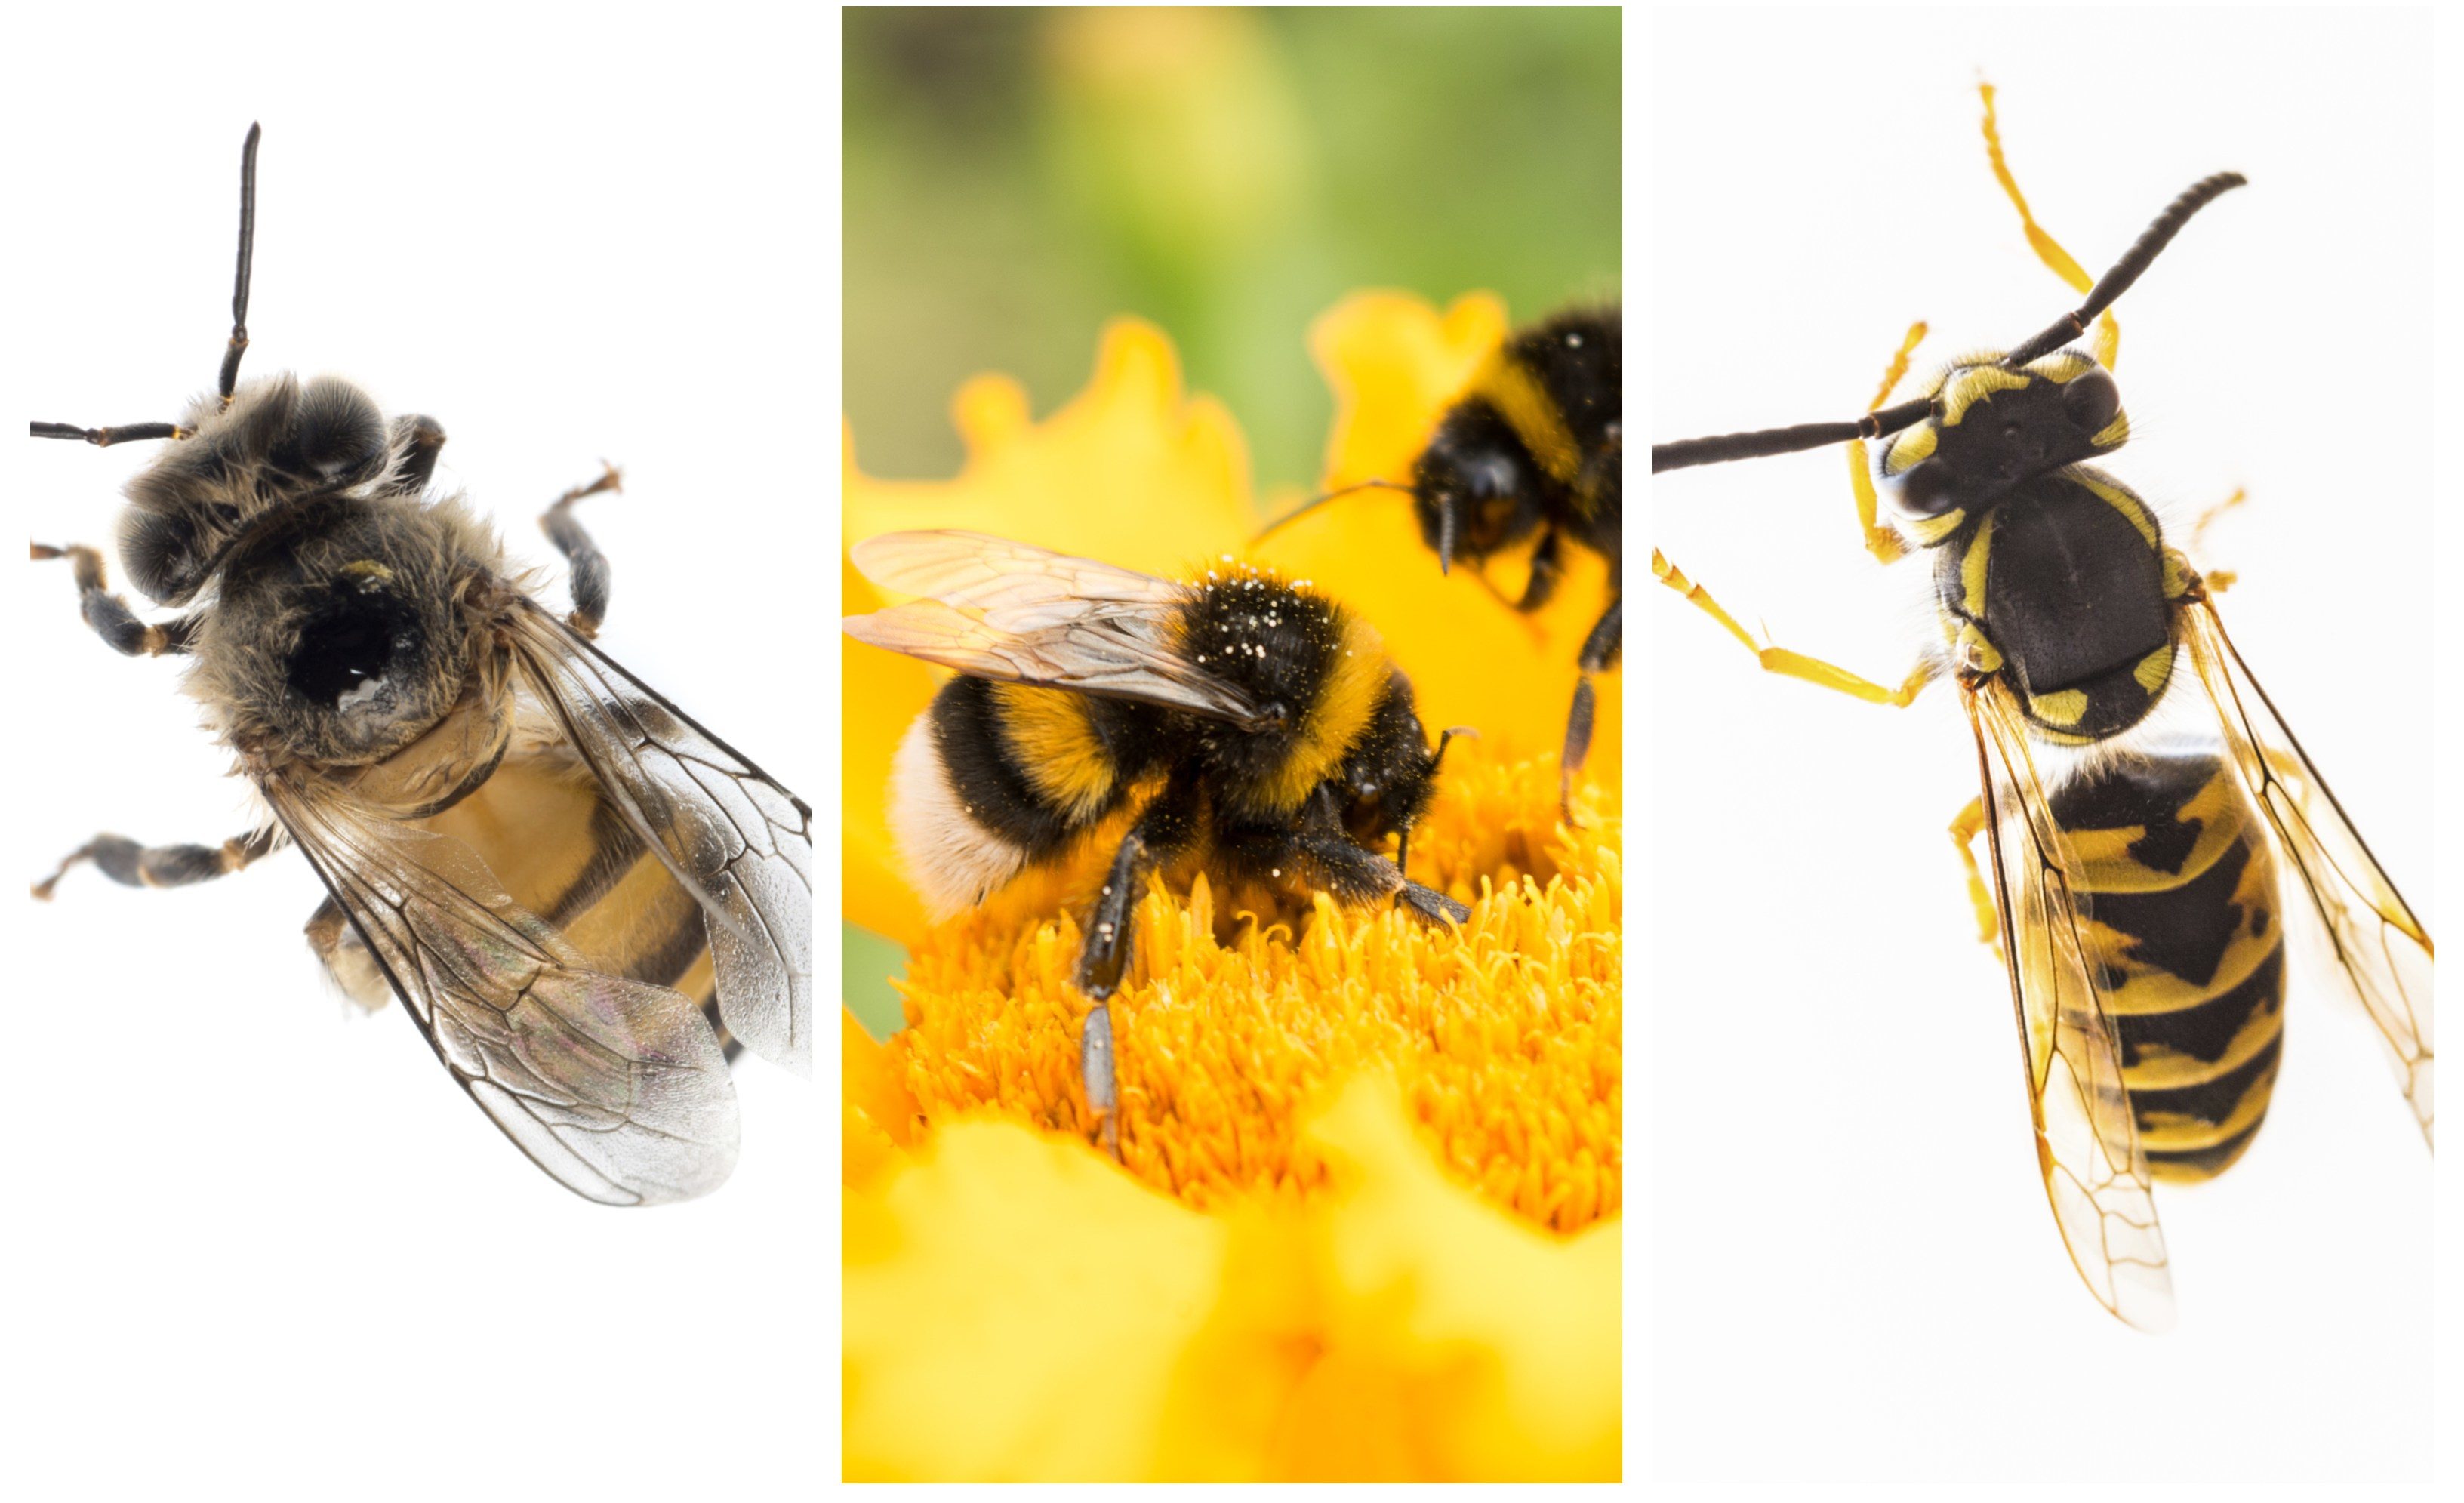 L-R: A honey bee, a bumble bee and a wasp.